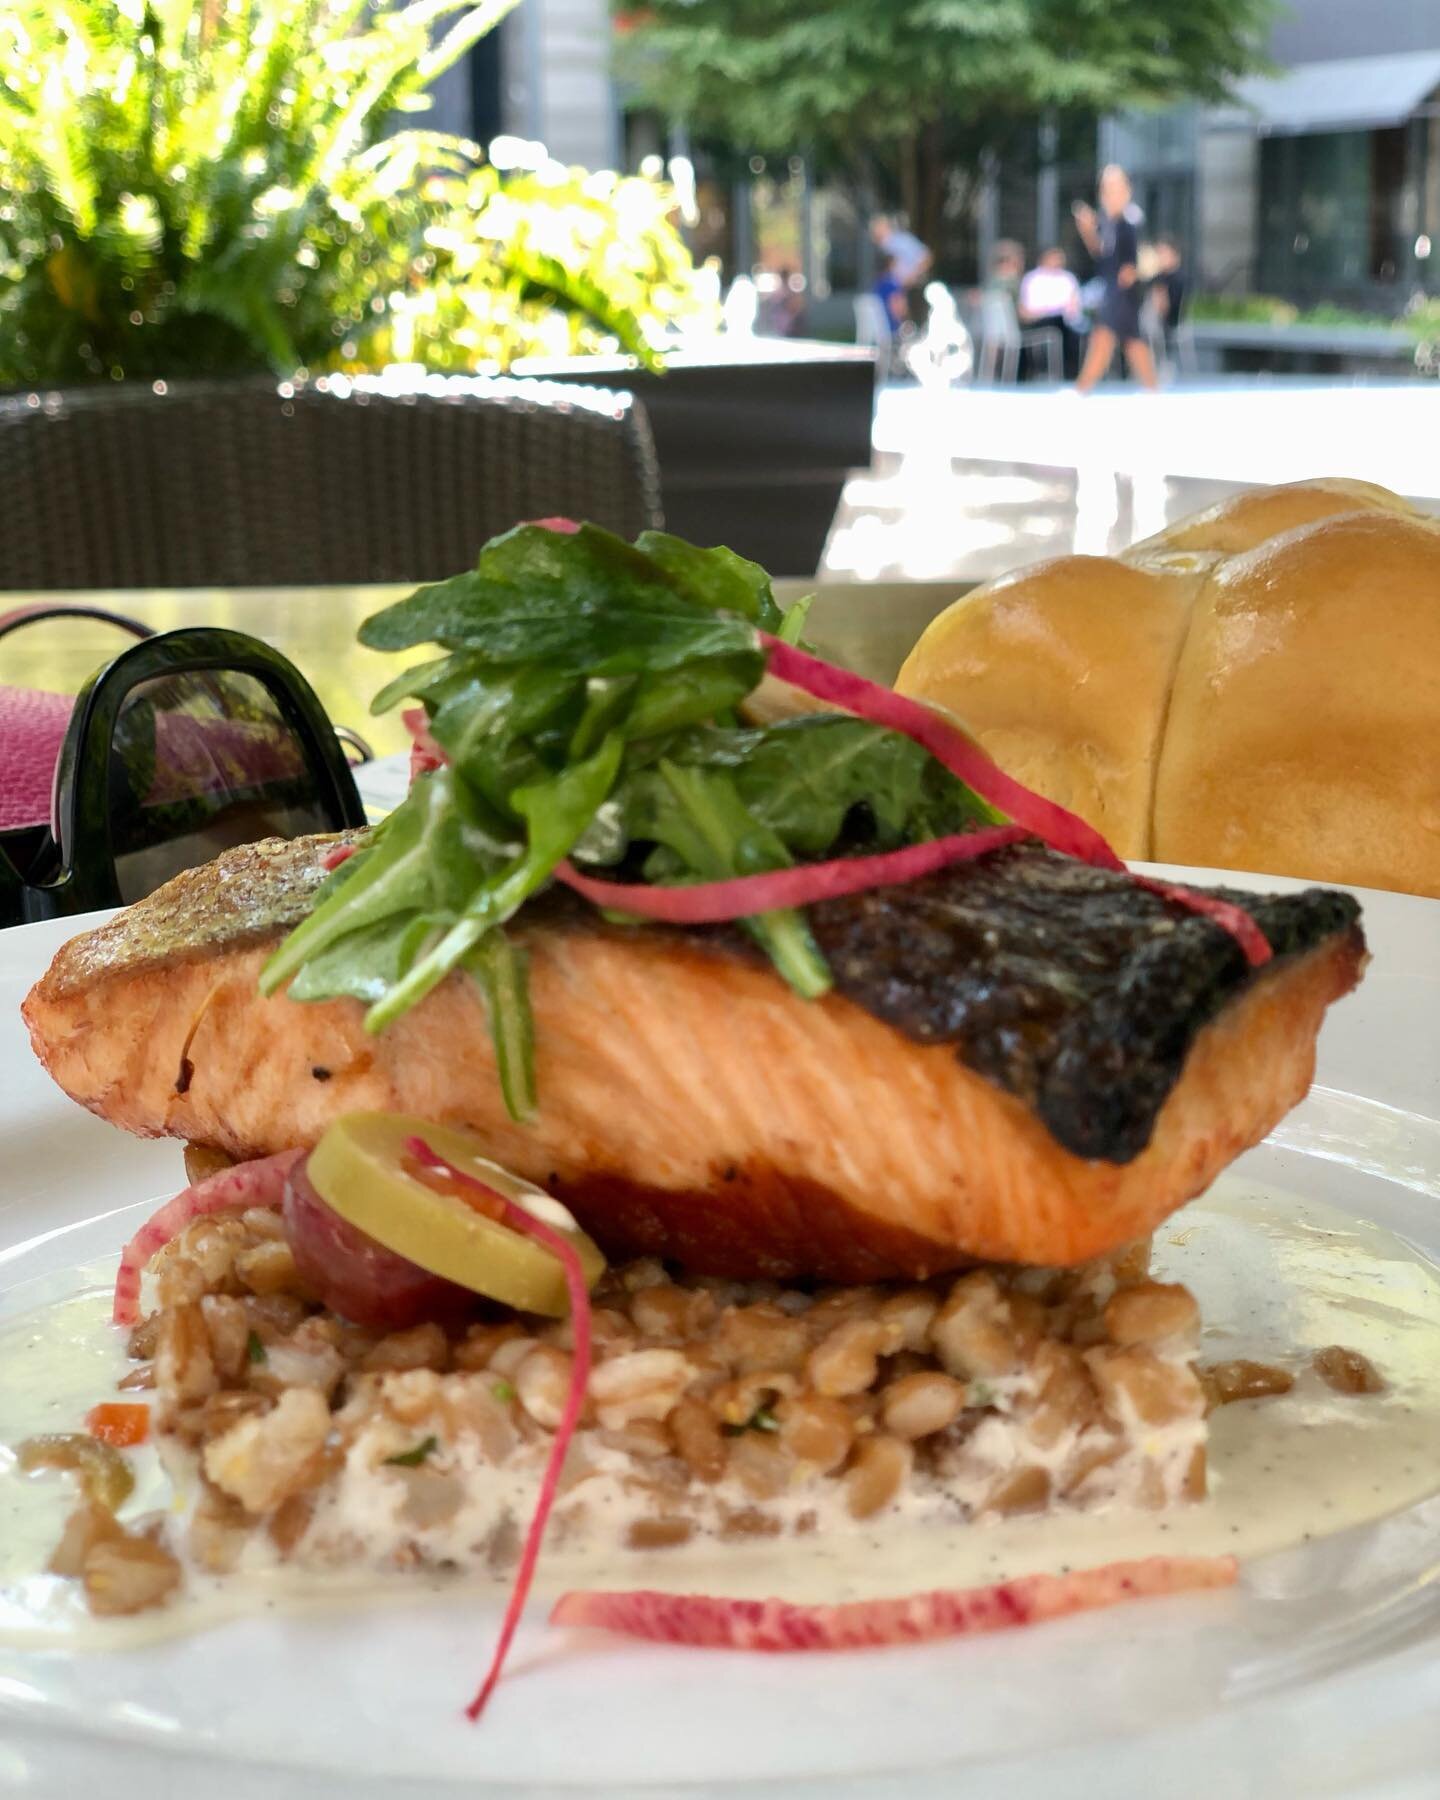 Enjoying a light bite from the #powerlunch section of the menu. The pan roasted salmon and the Del salad were just the boost of energy that I needed on this glorious day in DC!
.
.
.
#passport2cuisine #delfriscos #dc #powerlunch #lunchbreak #eatwell